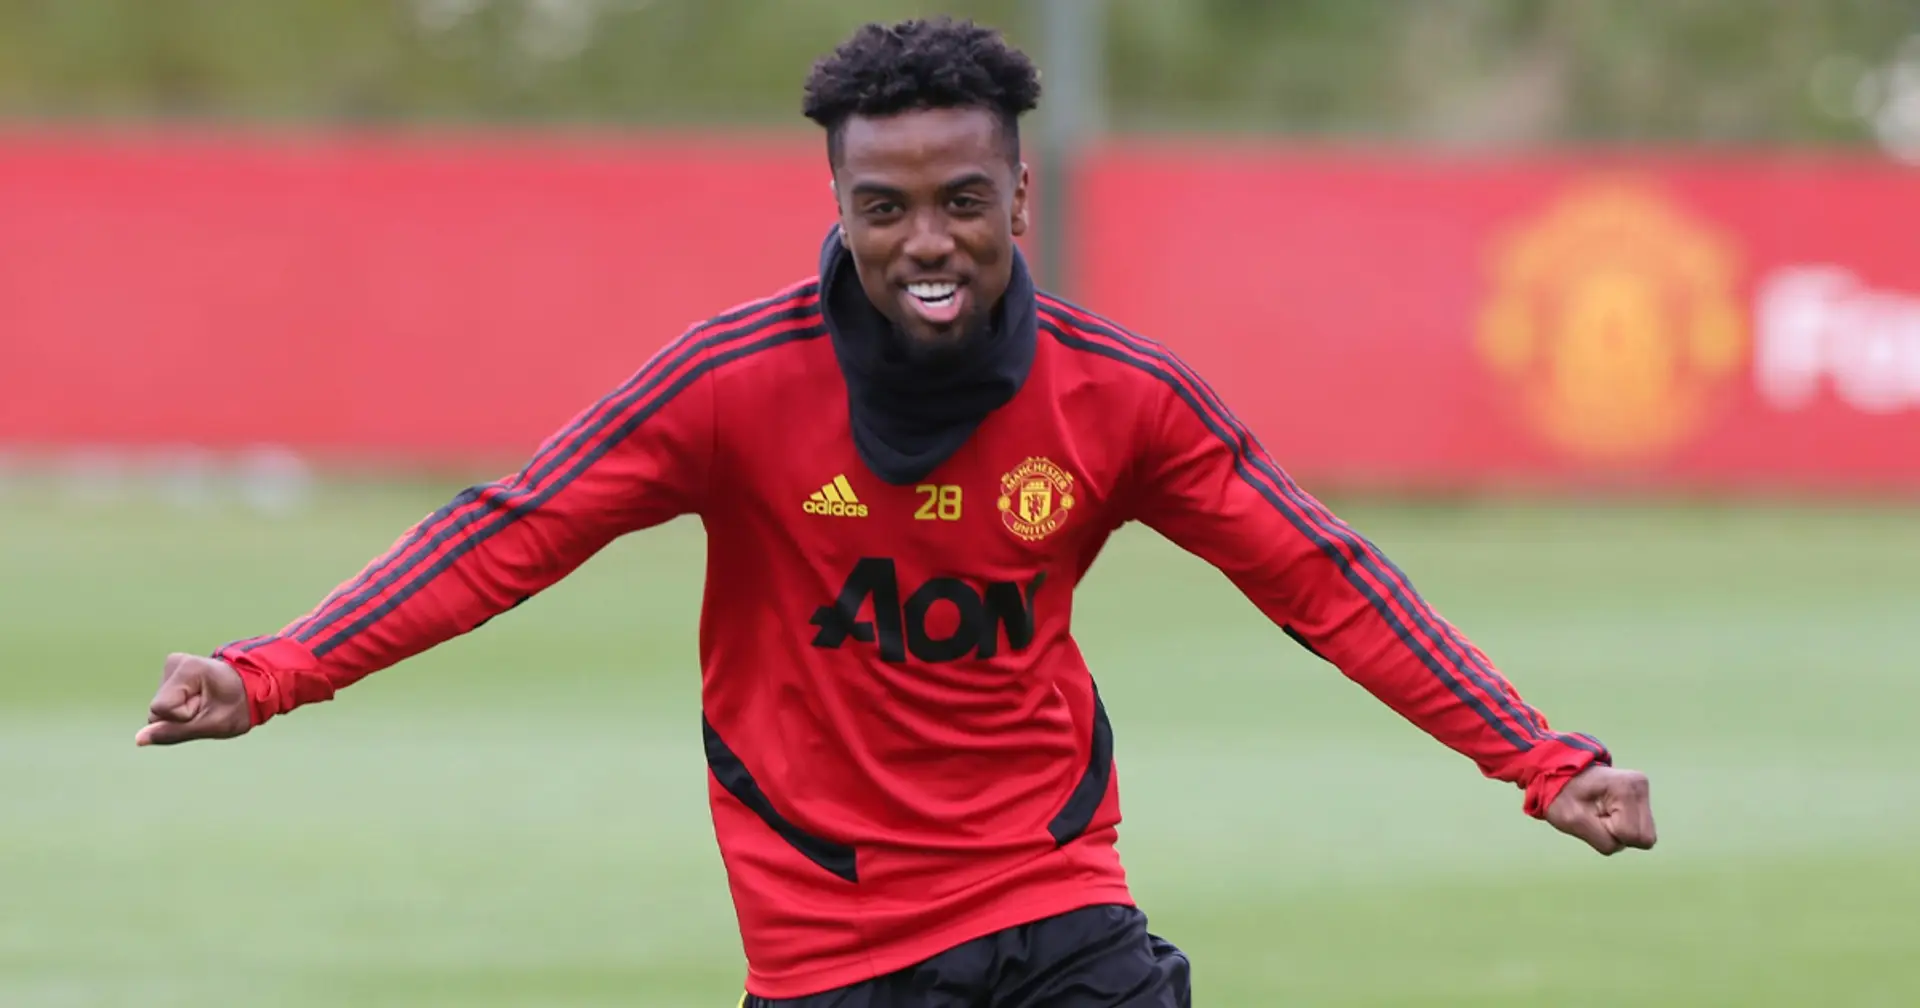 Chelsea 'to offer lucrative contract' to Angel Gomes after youngster rejects new Man United contract